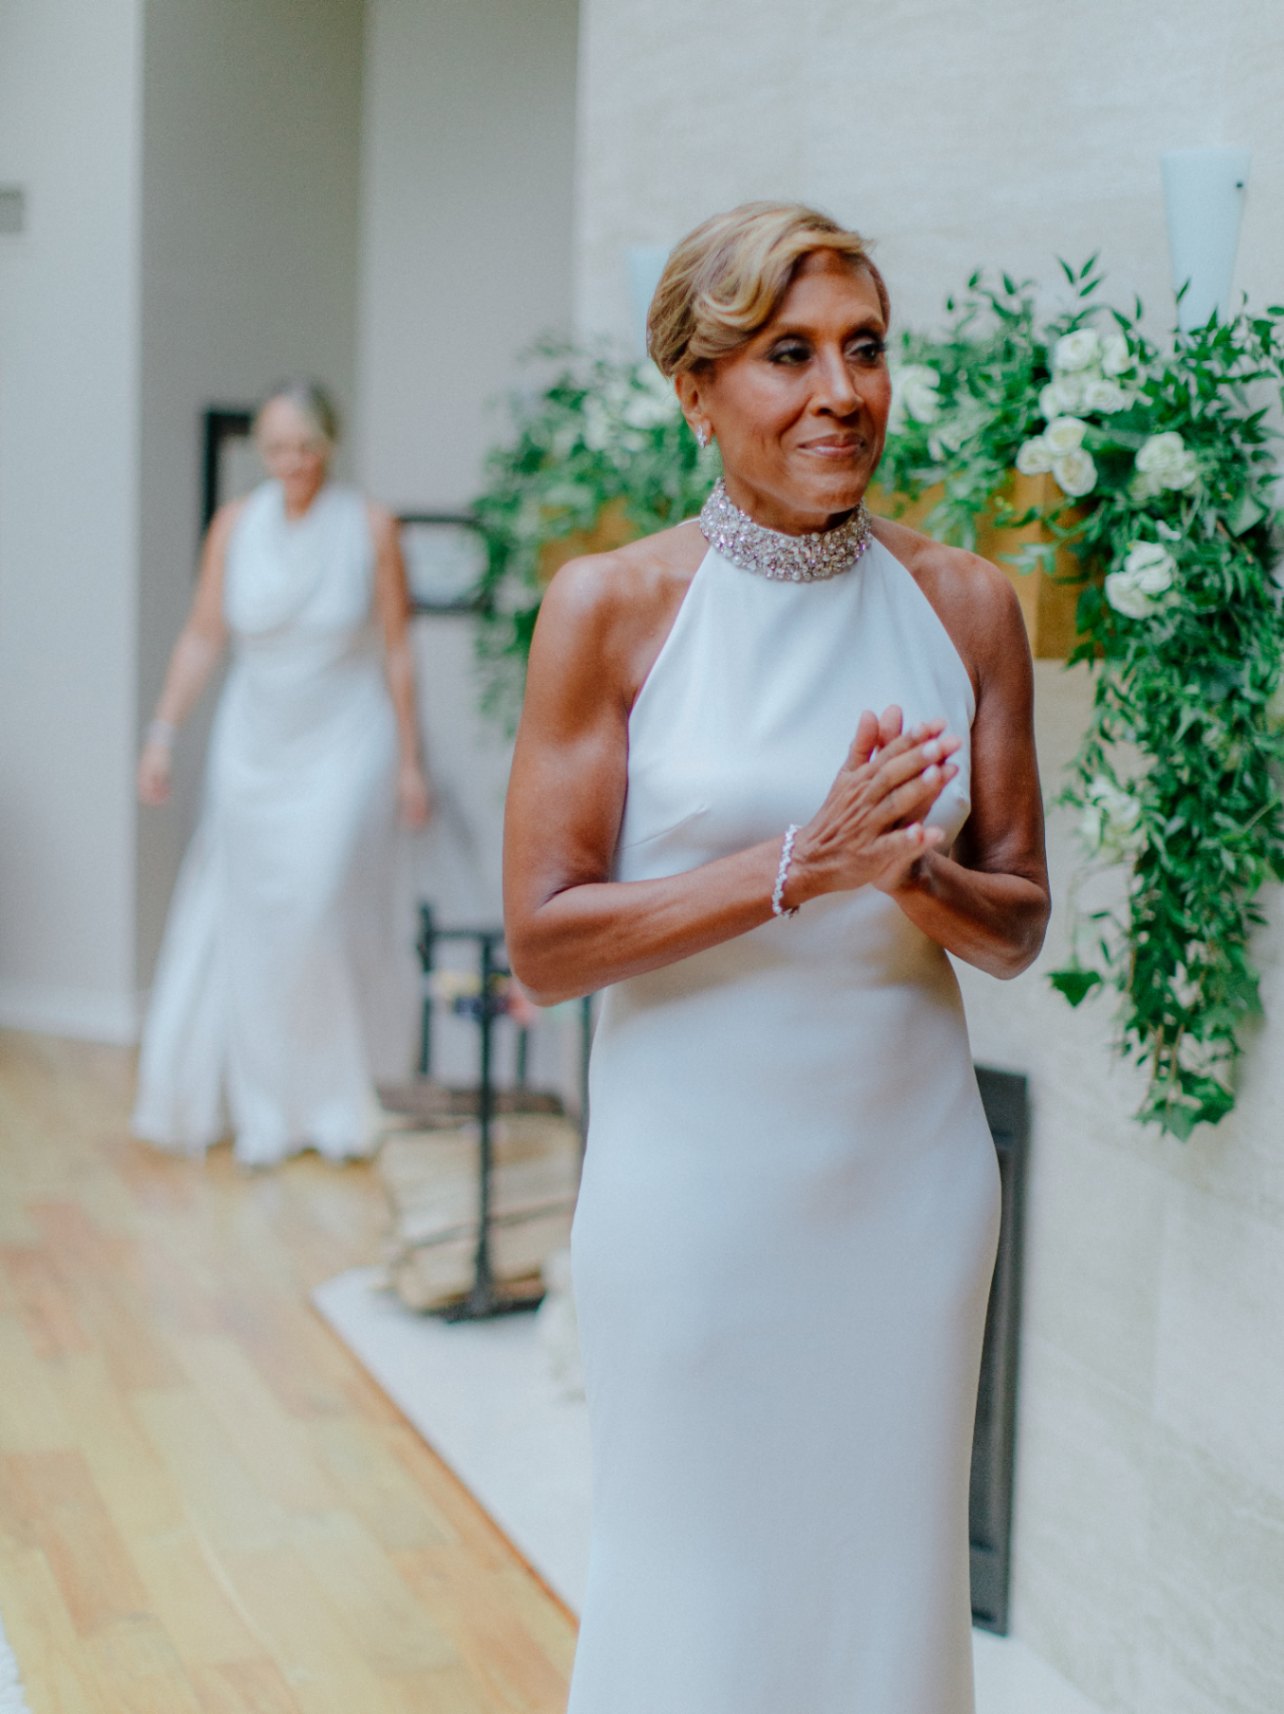 Celebrity lesbian couple Amber Laign, a white woman with blond hair, and her wife, Robin Roberts, a Black woman with light brown hair. Robin is waiting for Amber during their first look on their wedding day. Photo by Chris J. Evans